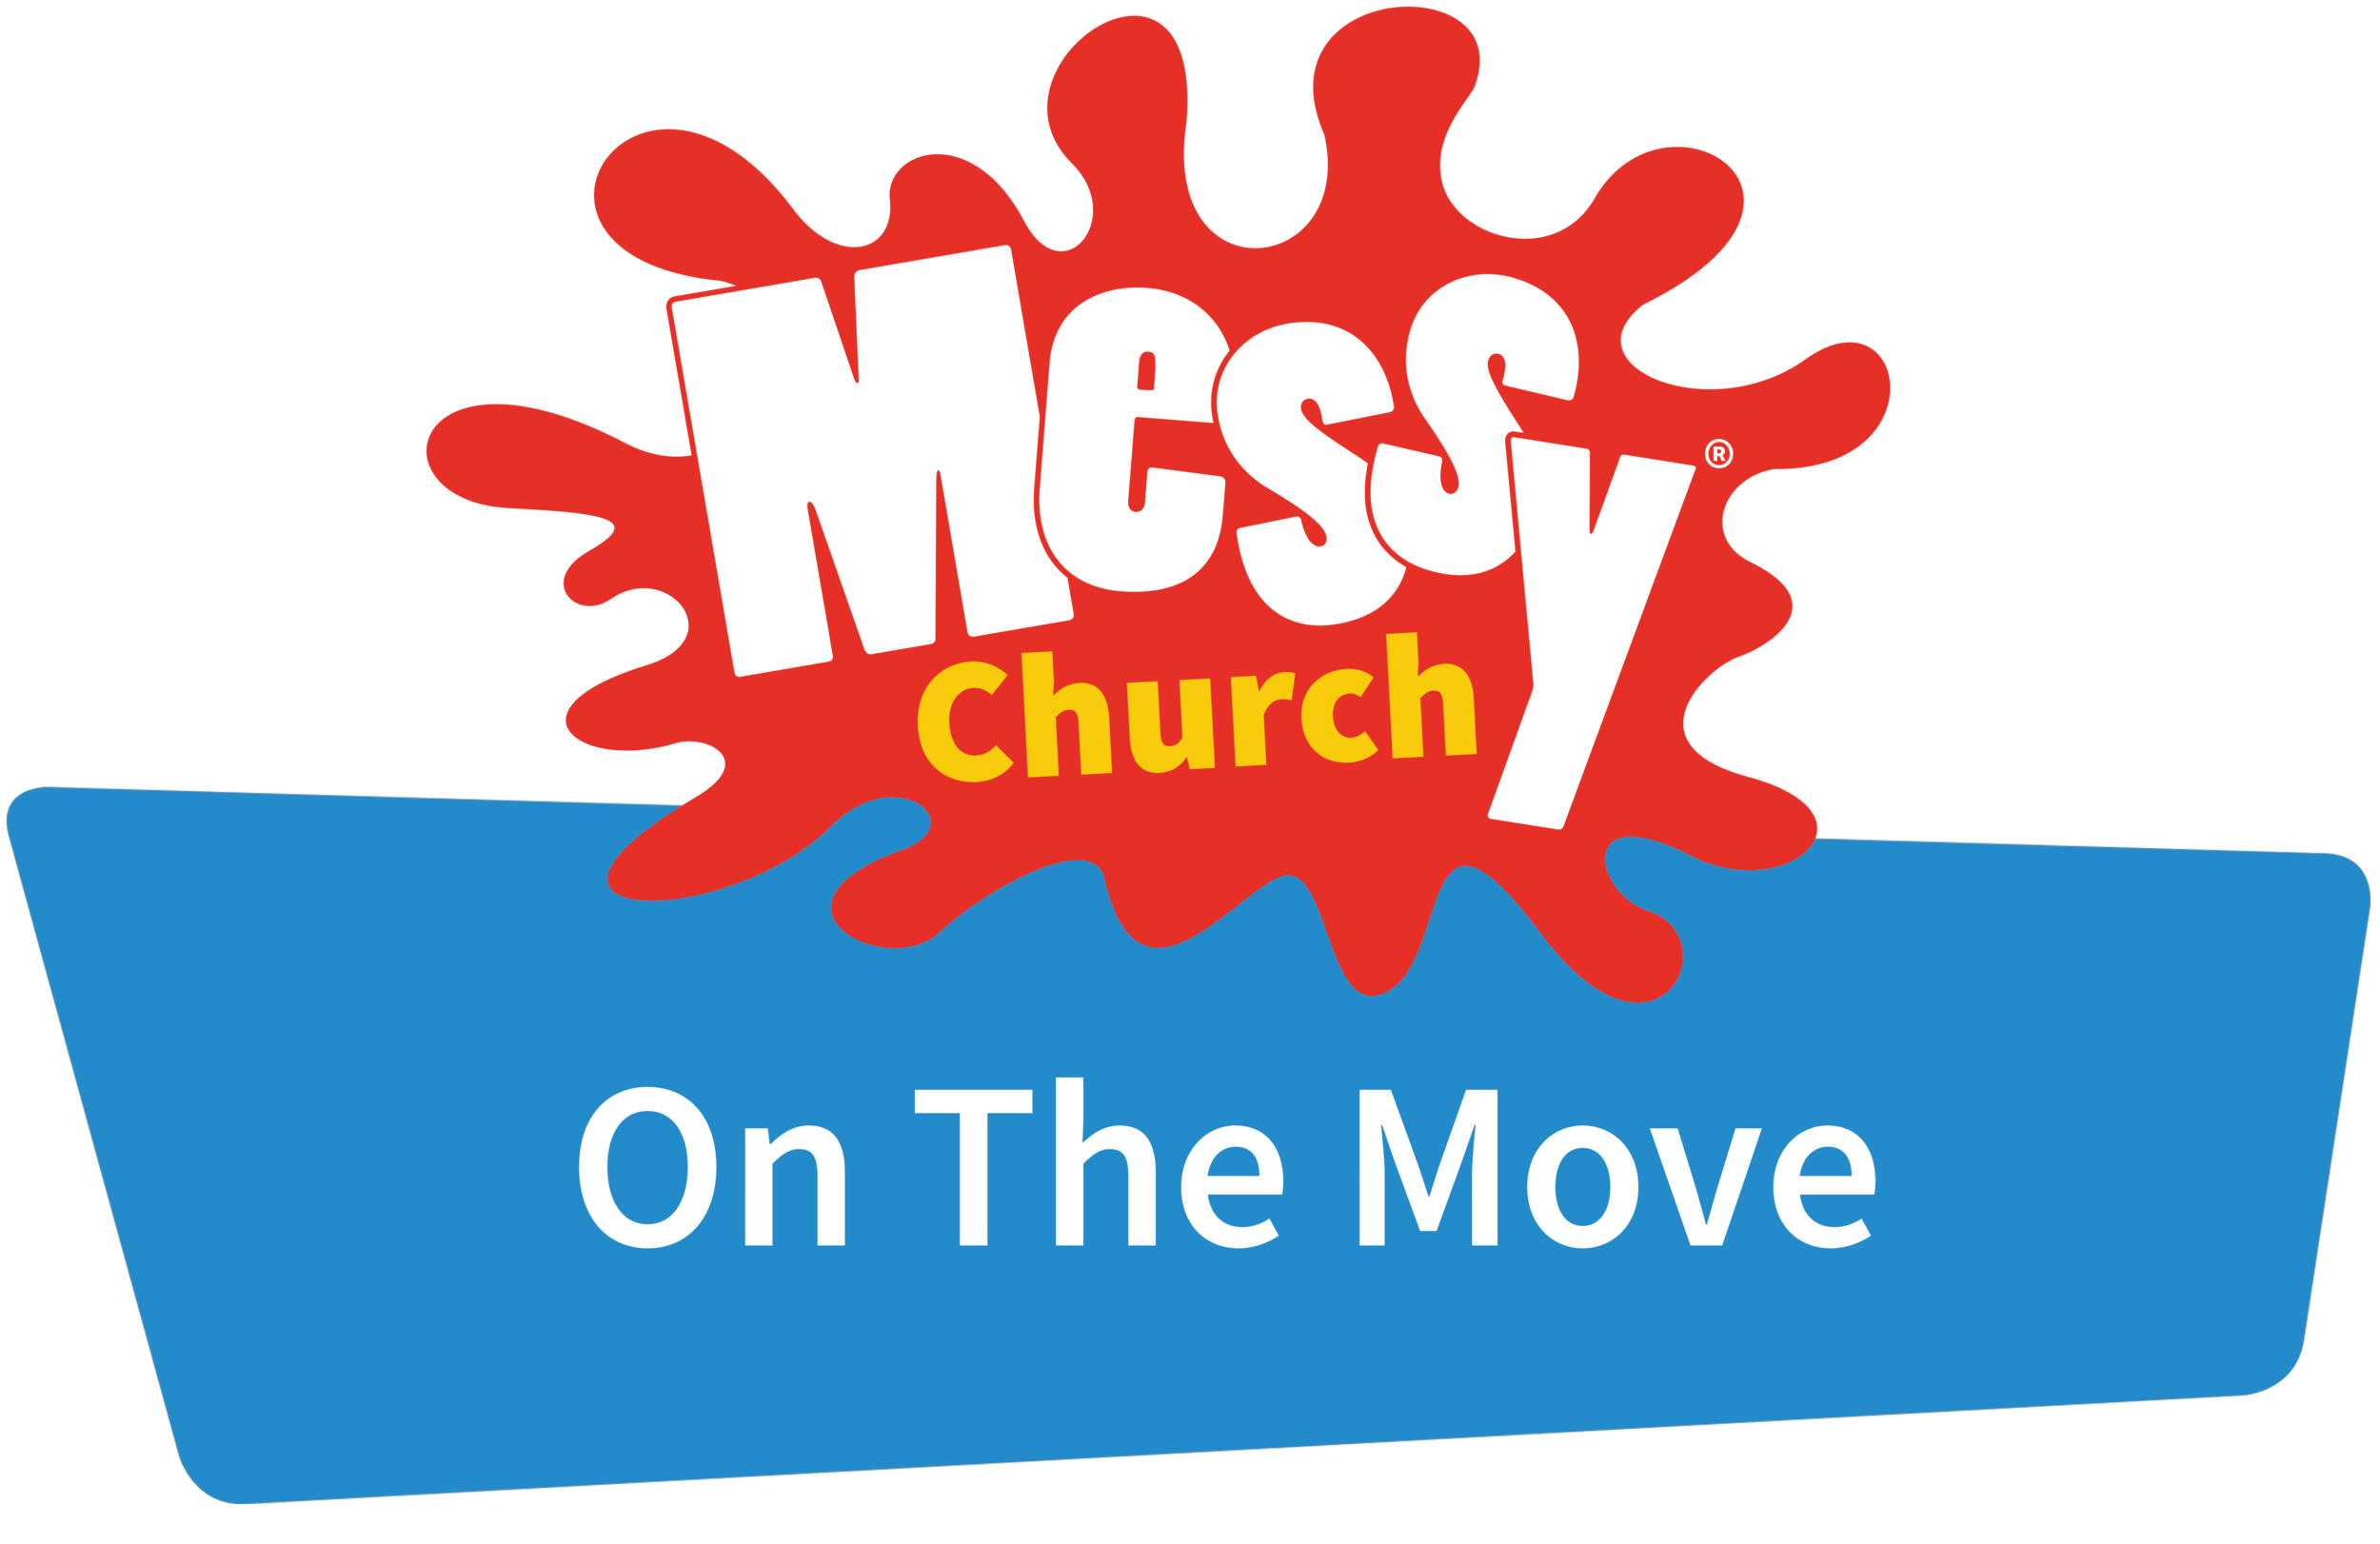 Messy_Church_On The Move®.png